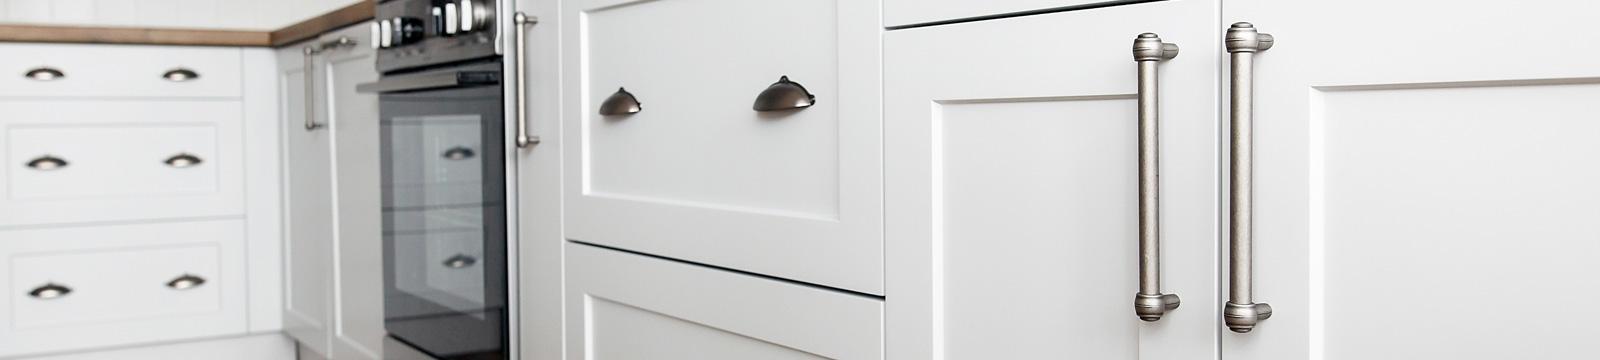 cabinet handles and accessories